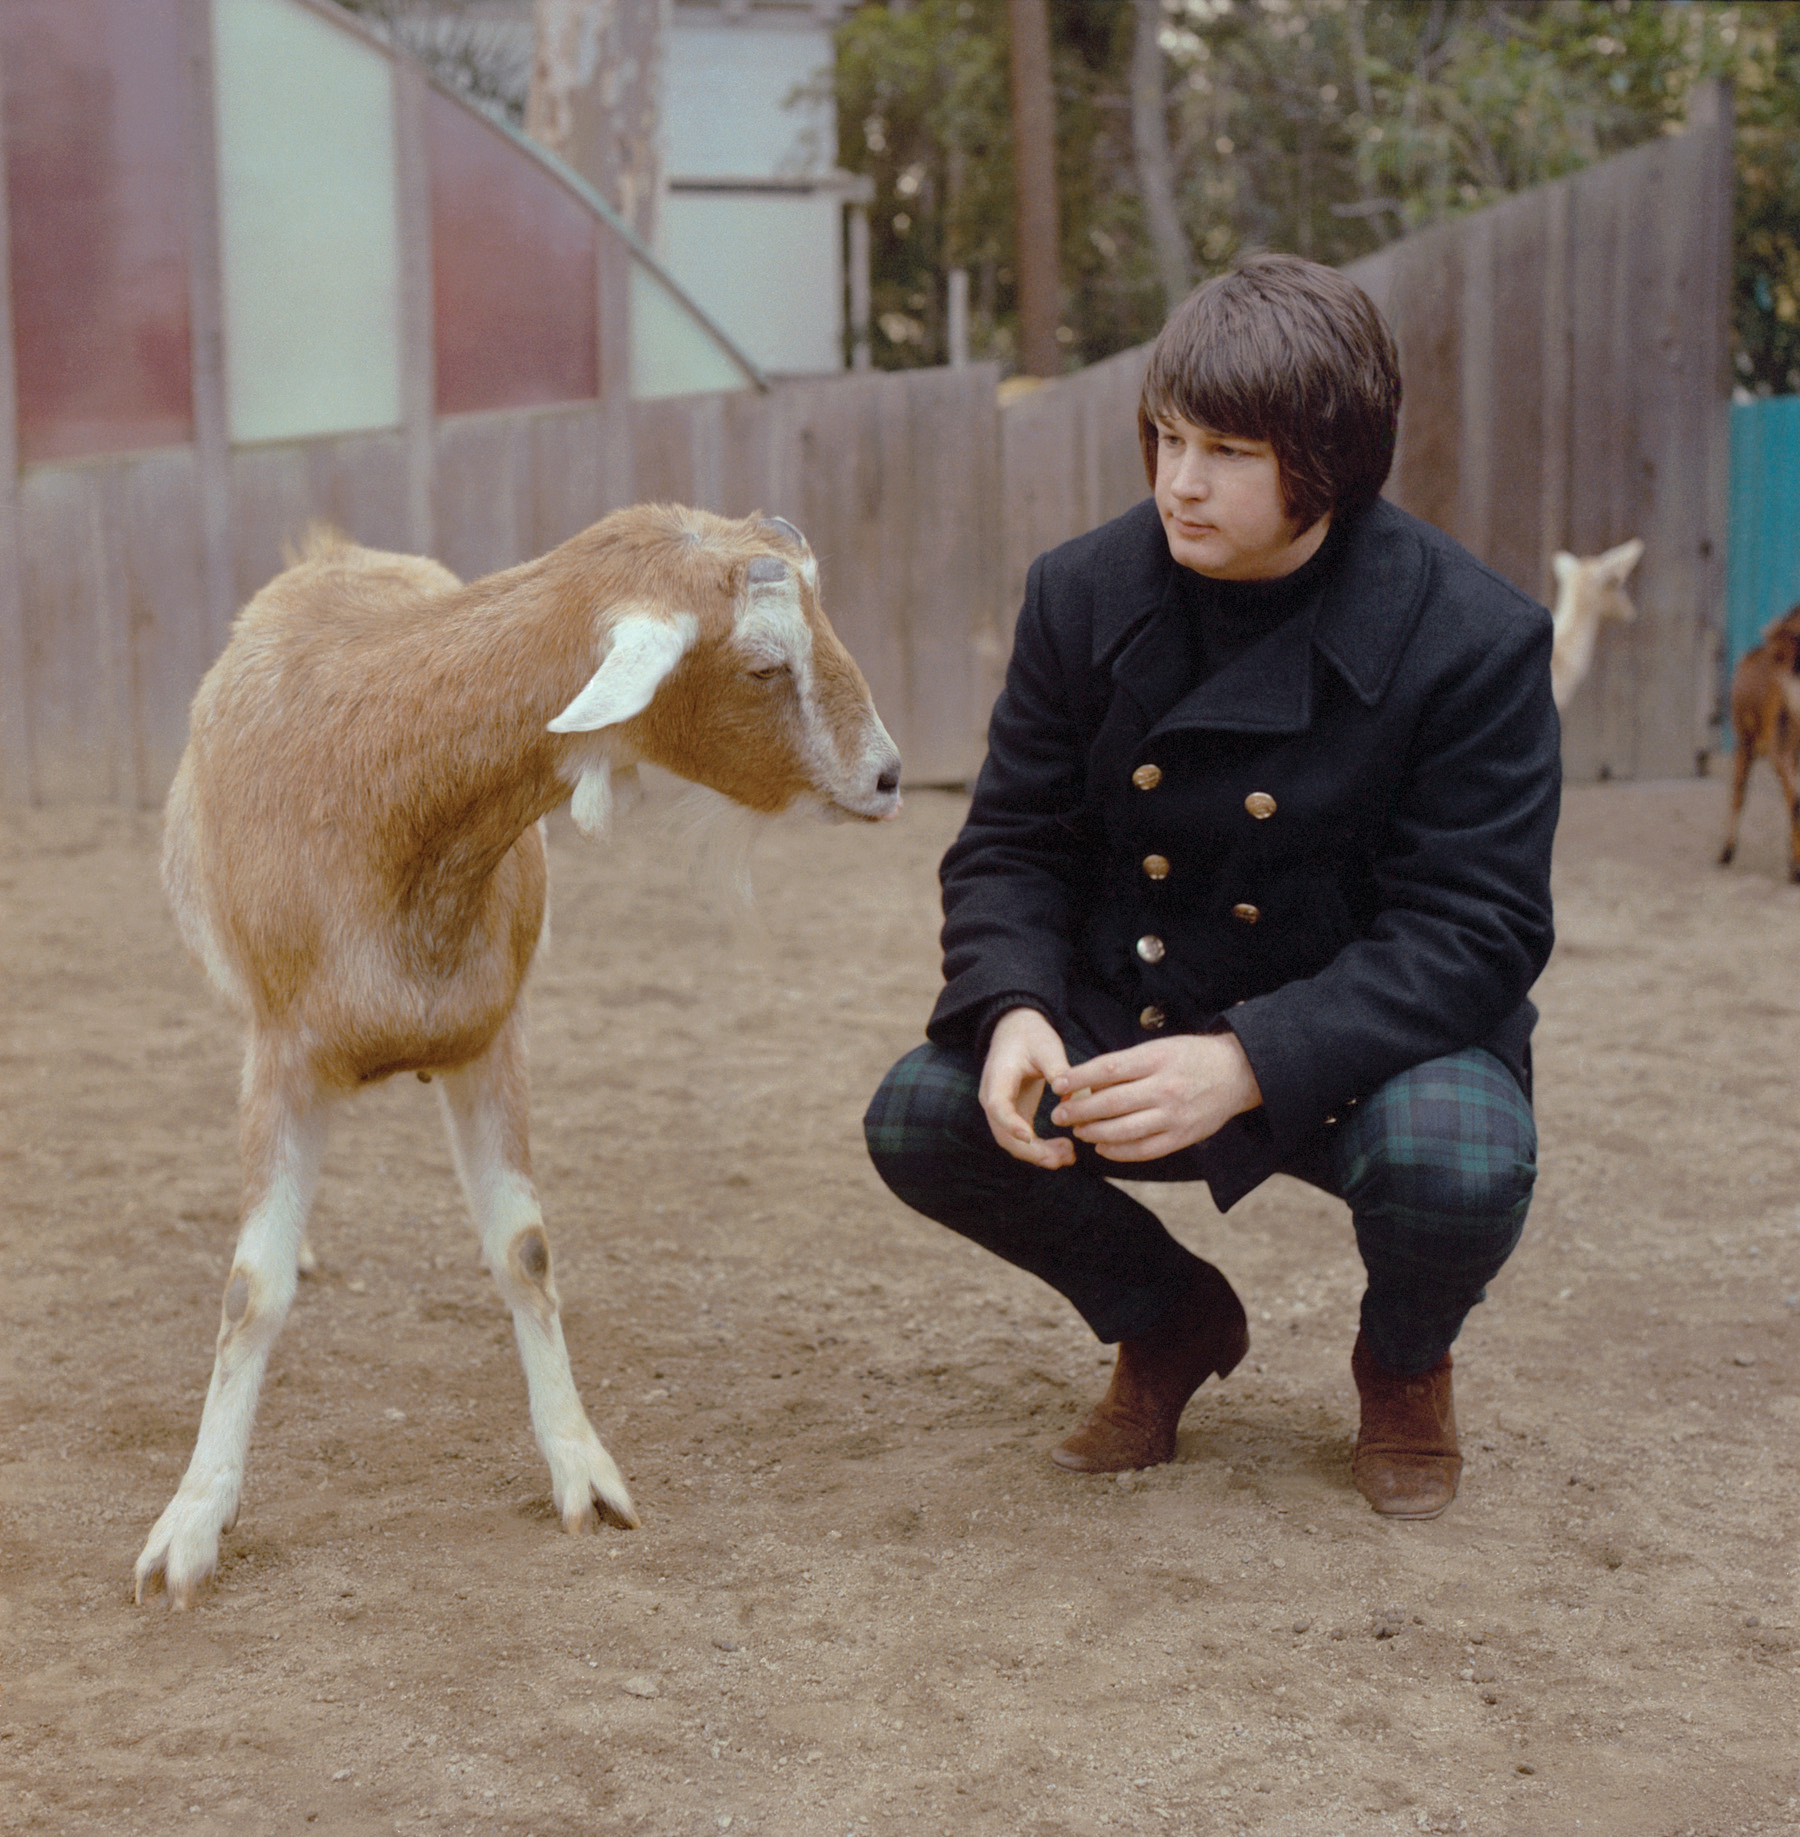 The Beach Boys' Pet Sounds photo shoot by George Jerman at San Diego Zoo, California, in February 1966.